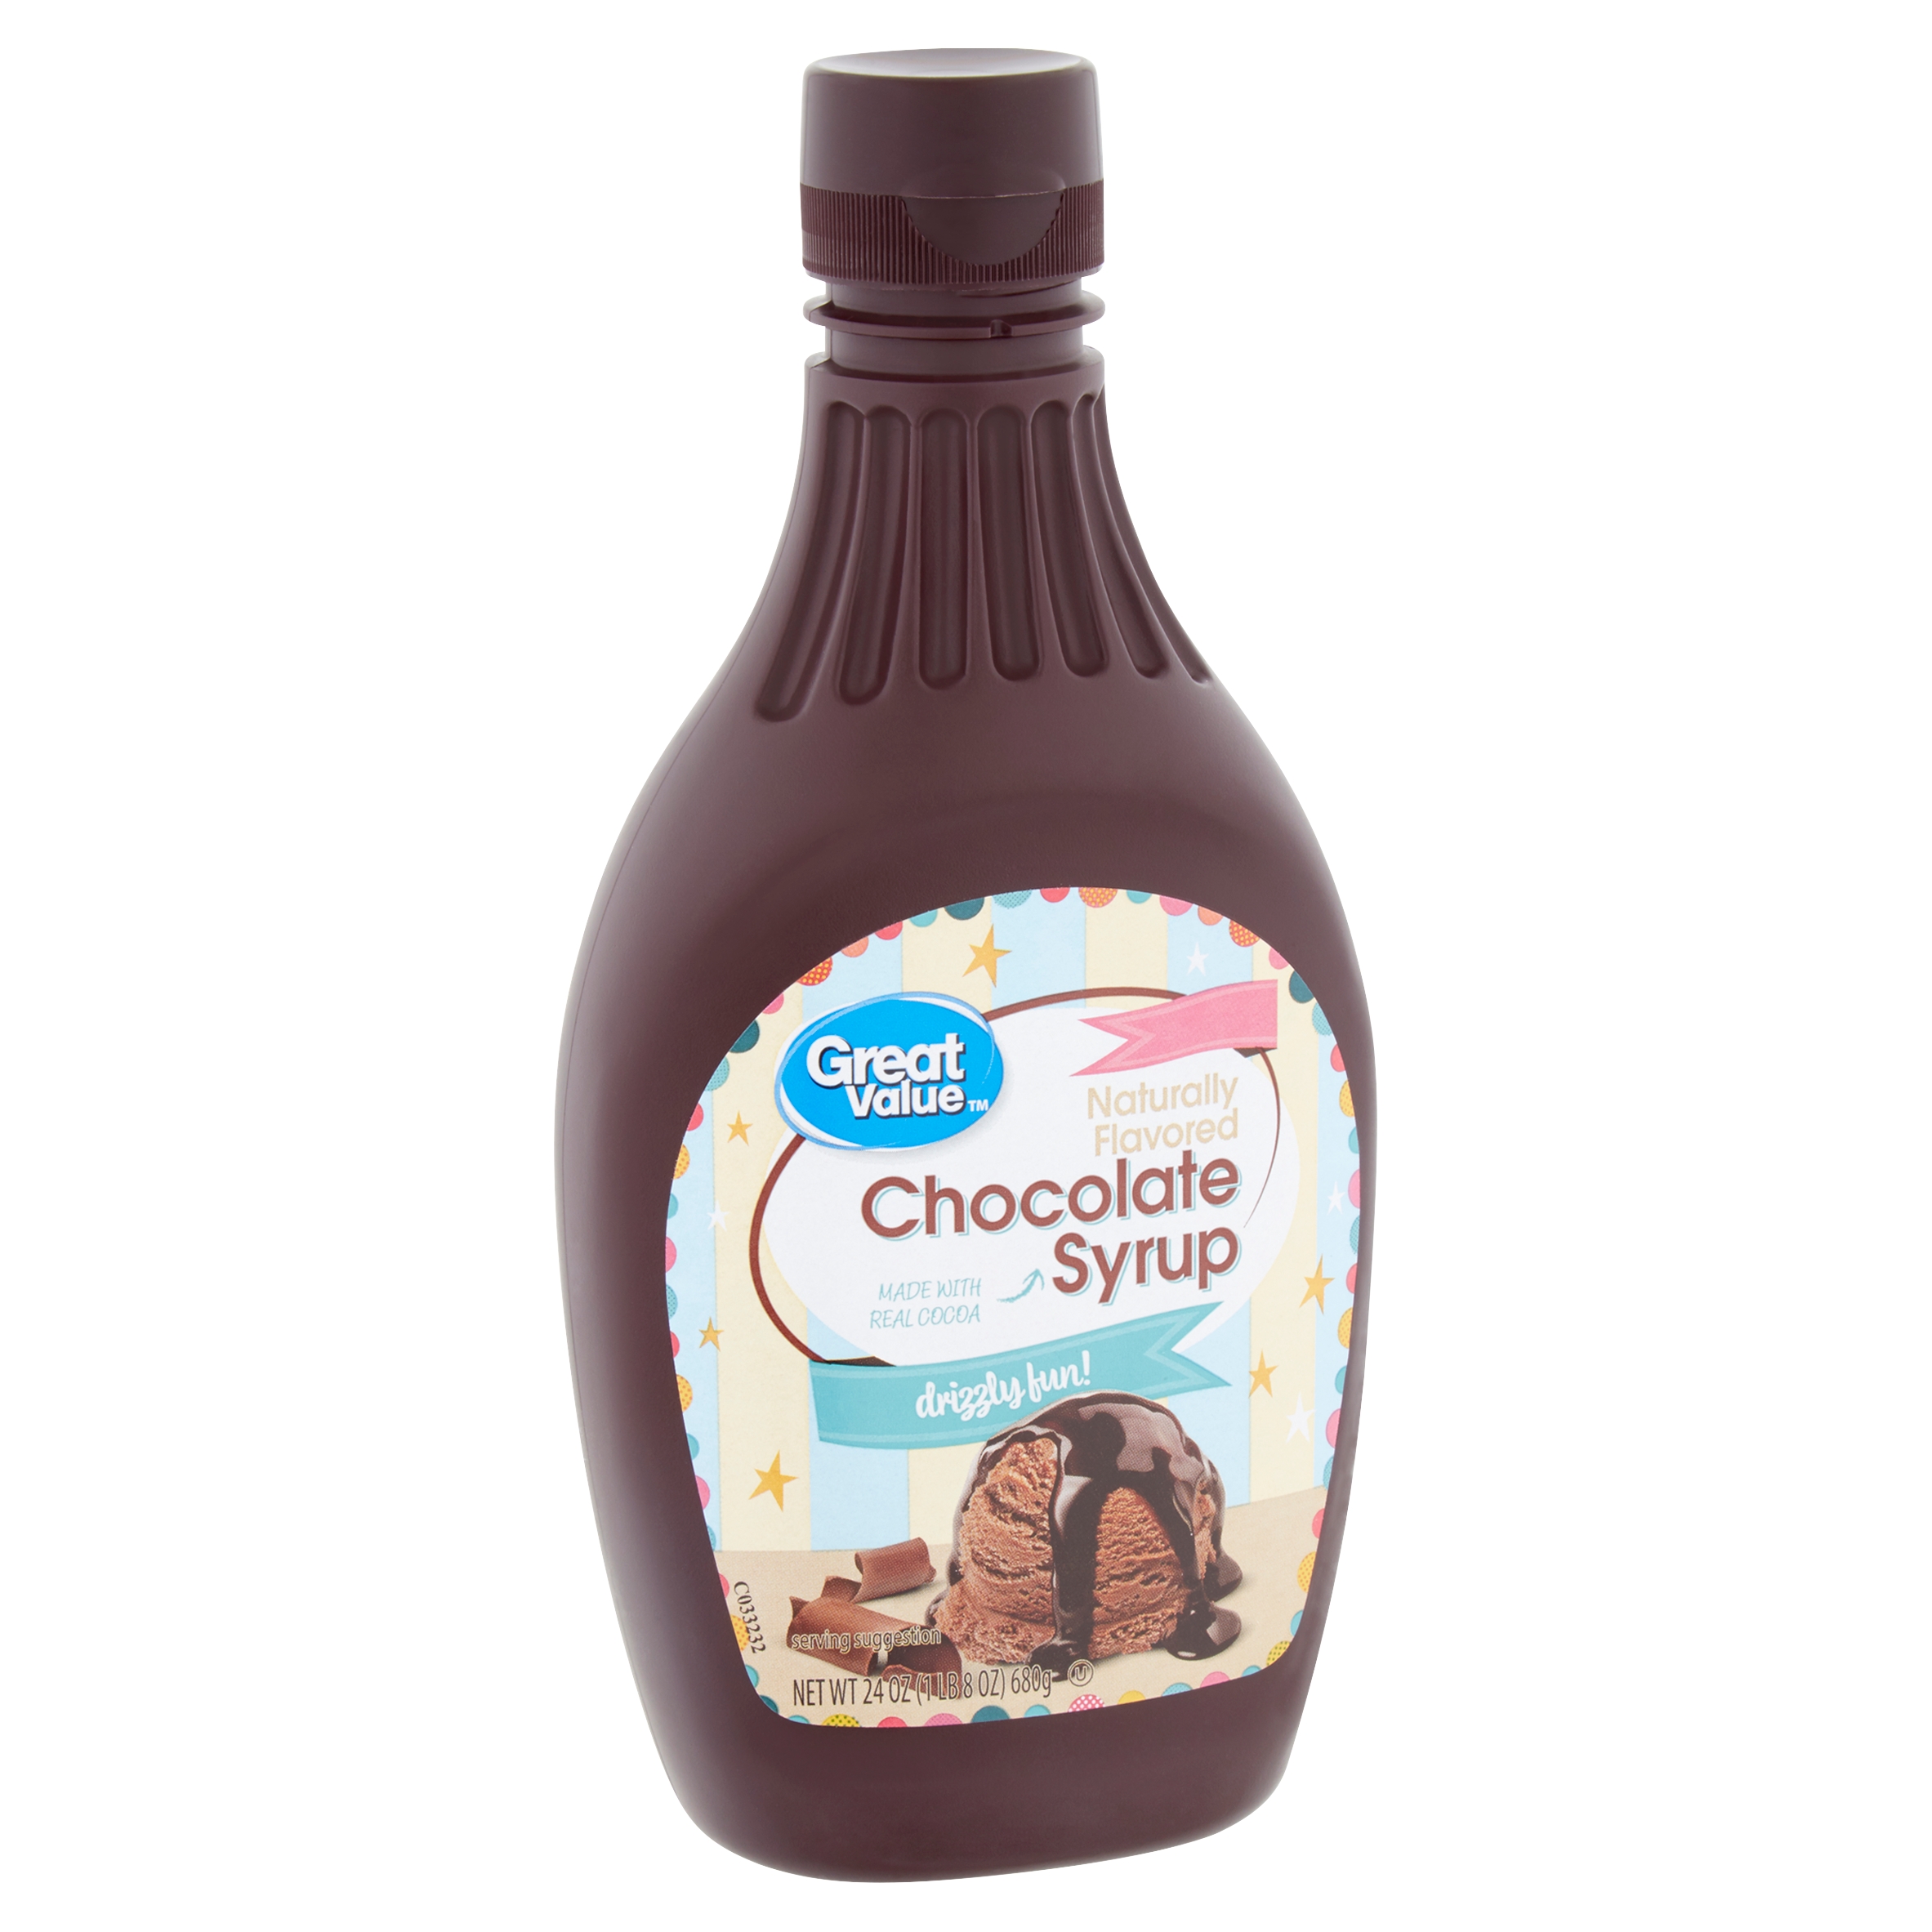 Great Value Chocolate Syrup, 24 Oz. Image